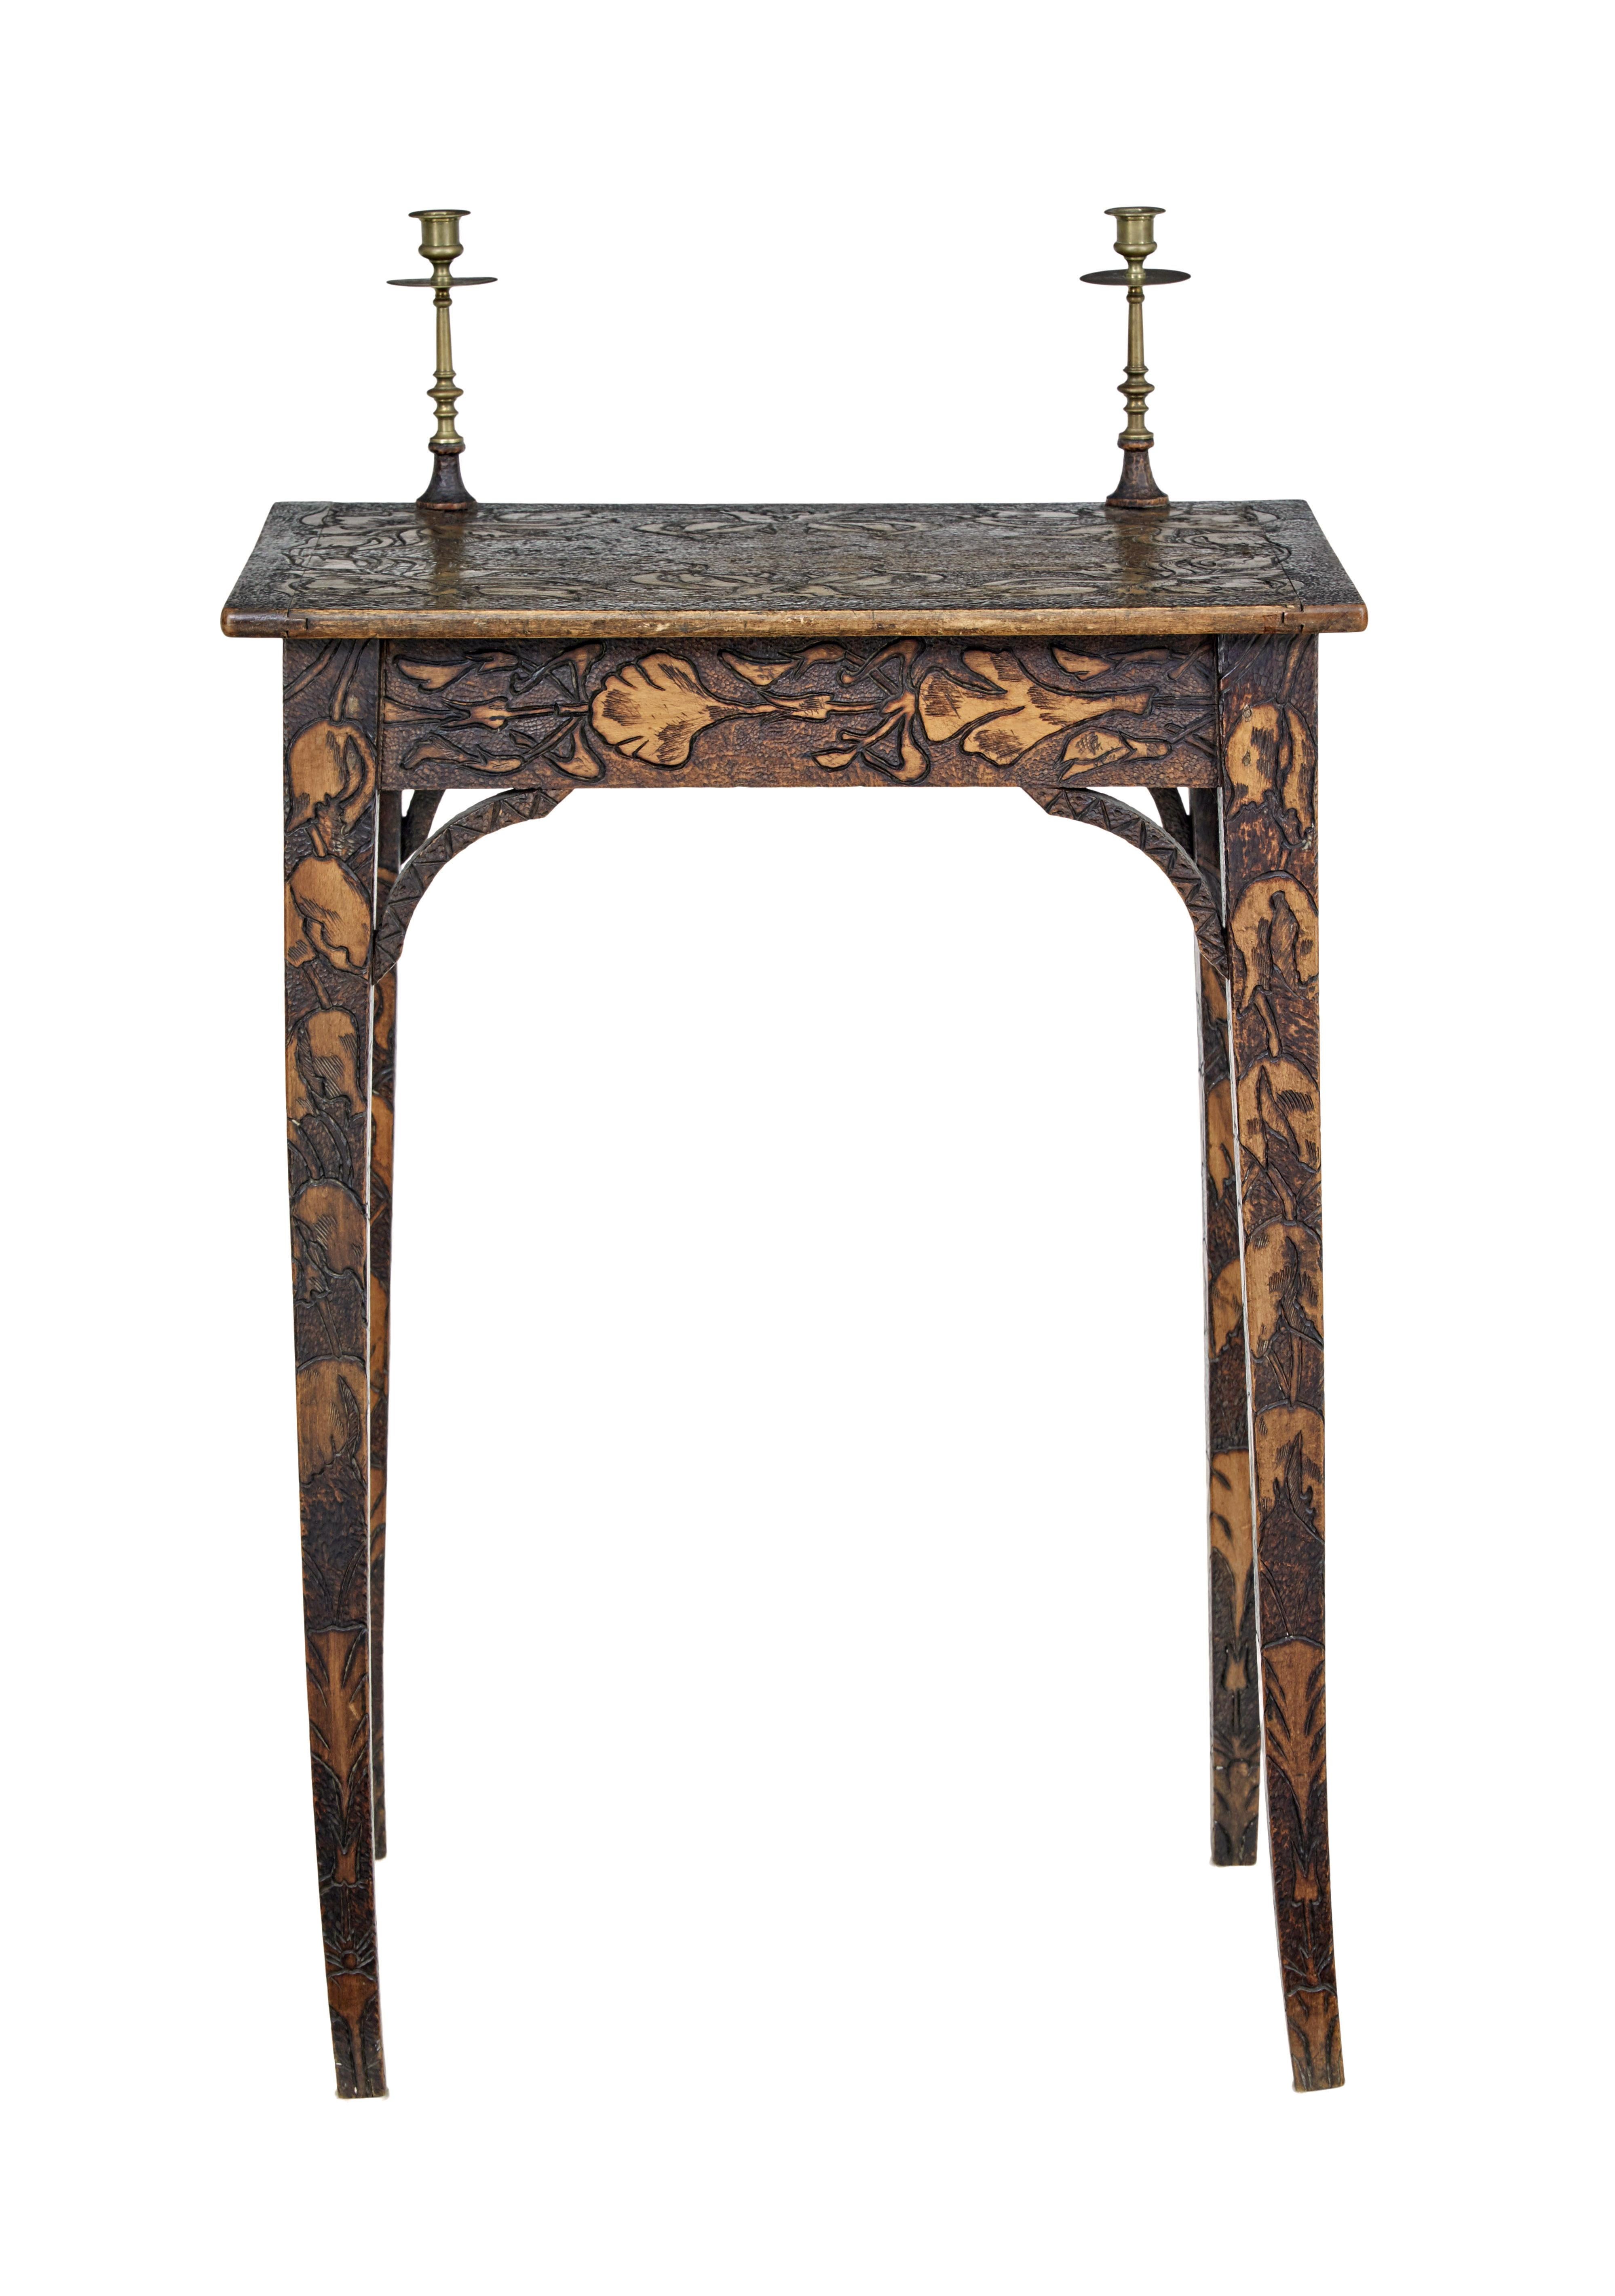 Early 20th century french carved poker work writing table circa 1900.

Unusual profusely carved small writing table. Carved tulips into the top surface, around the apron and down the legs. 2 original brass candle sticks fixed on the top surface.